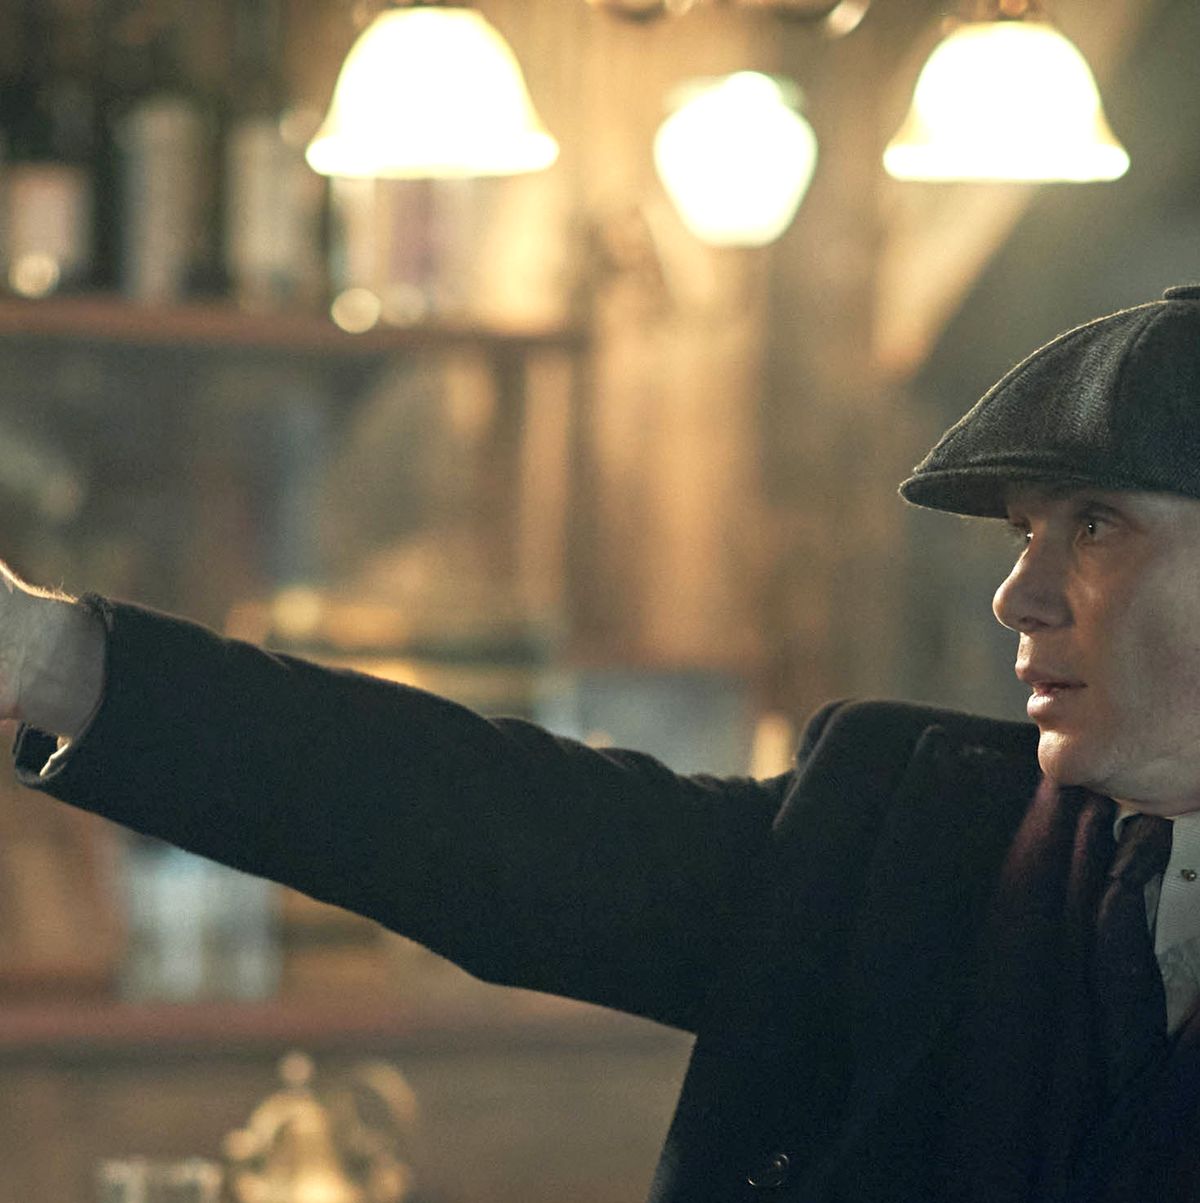 Box cadeau Peaky Blinders, Famille Shelby